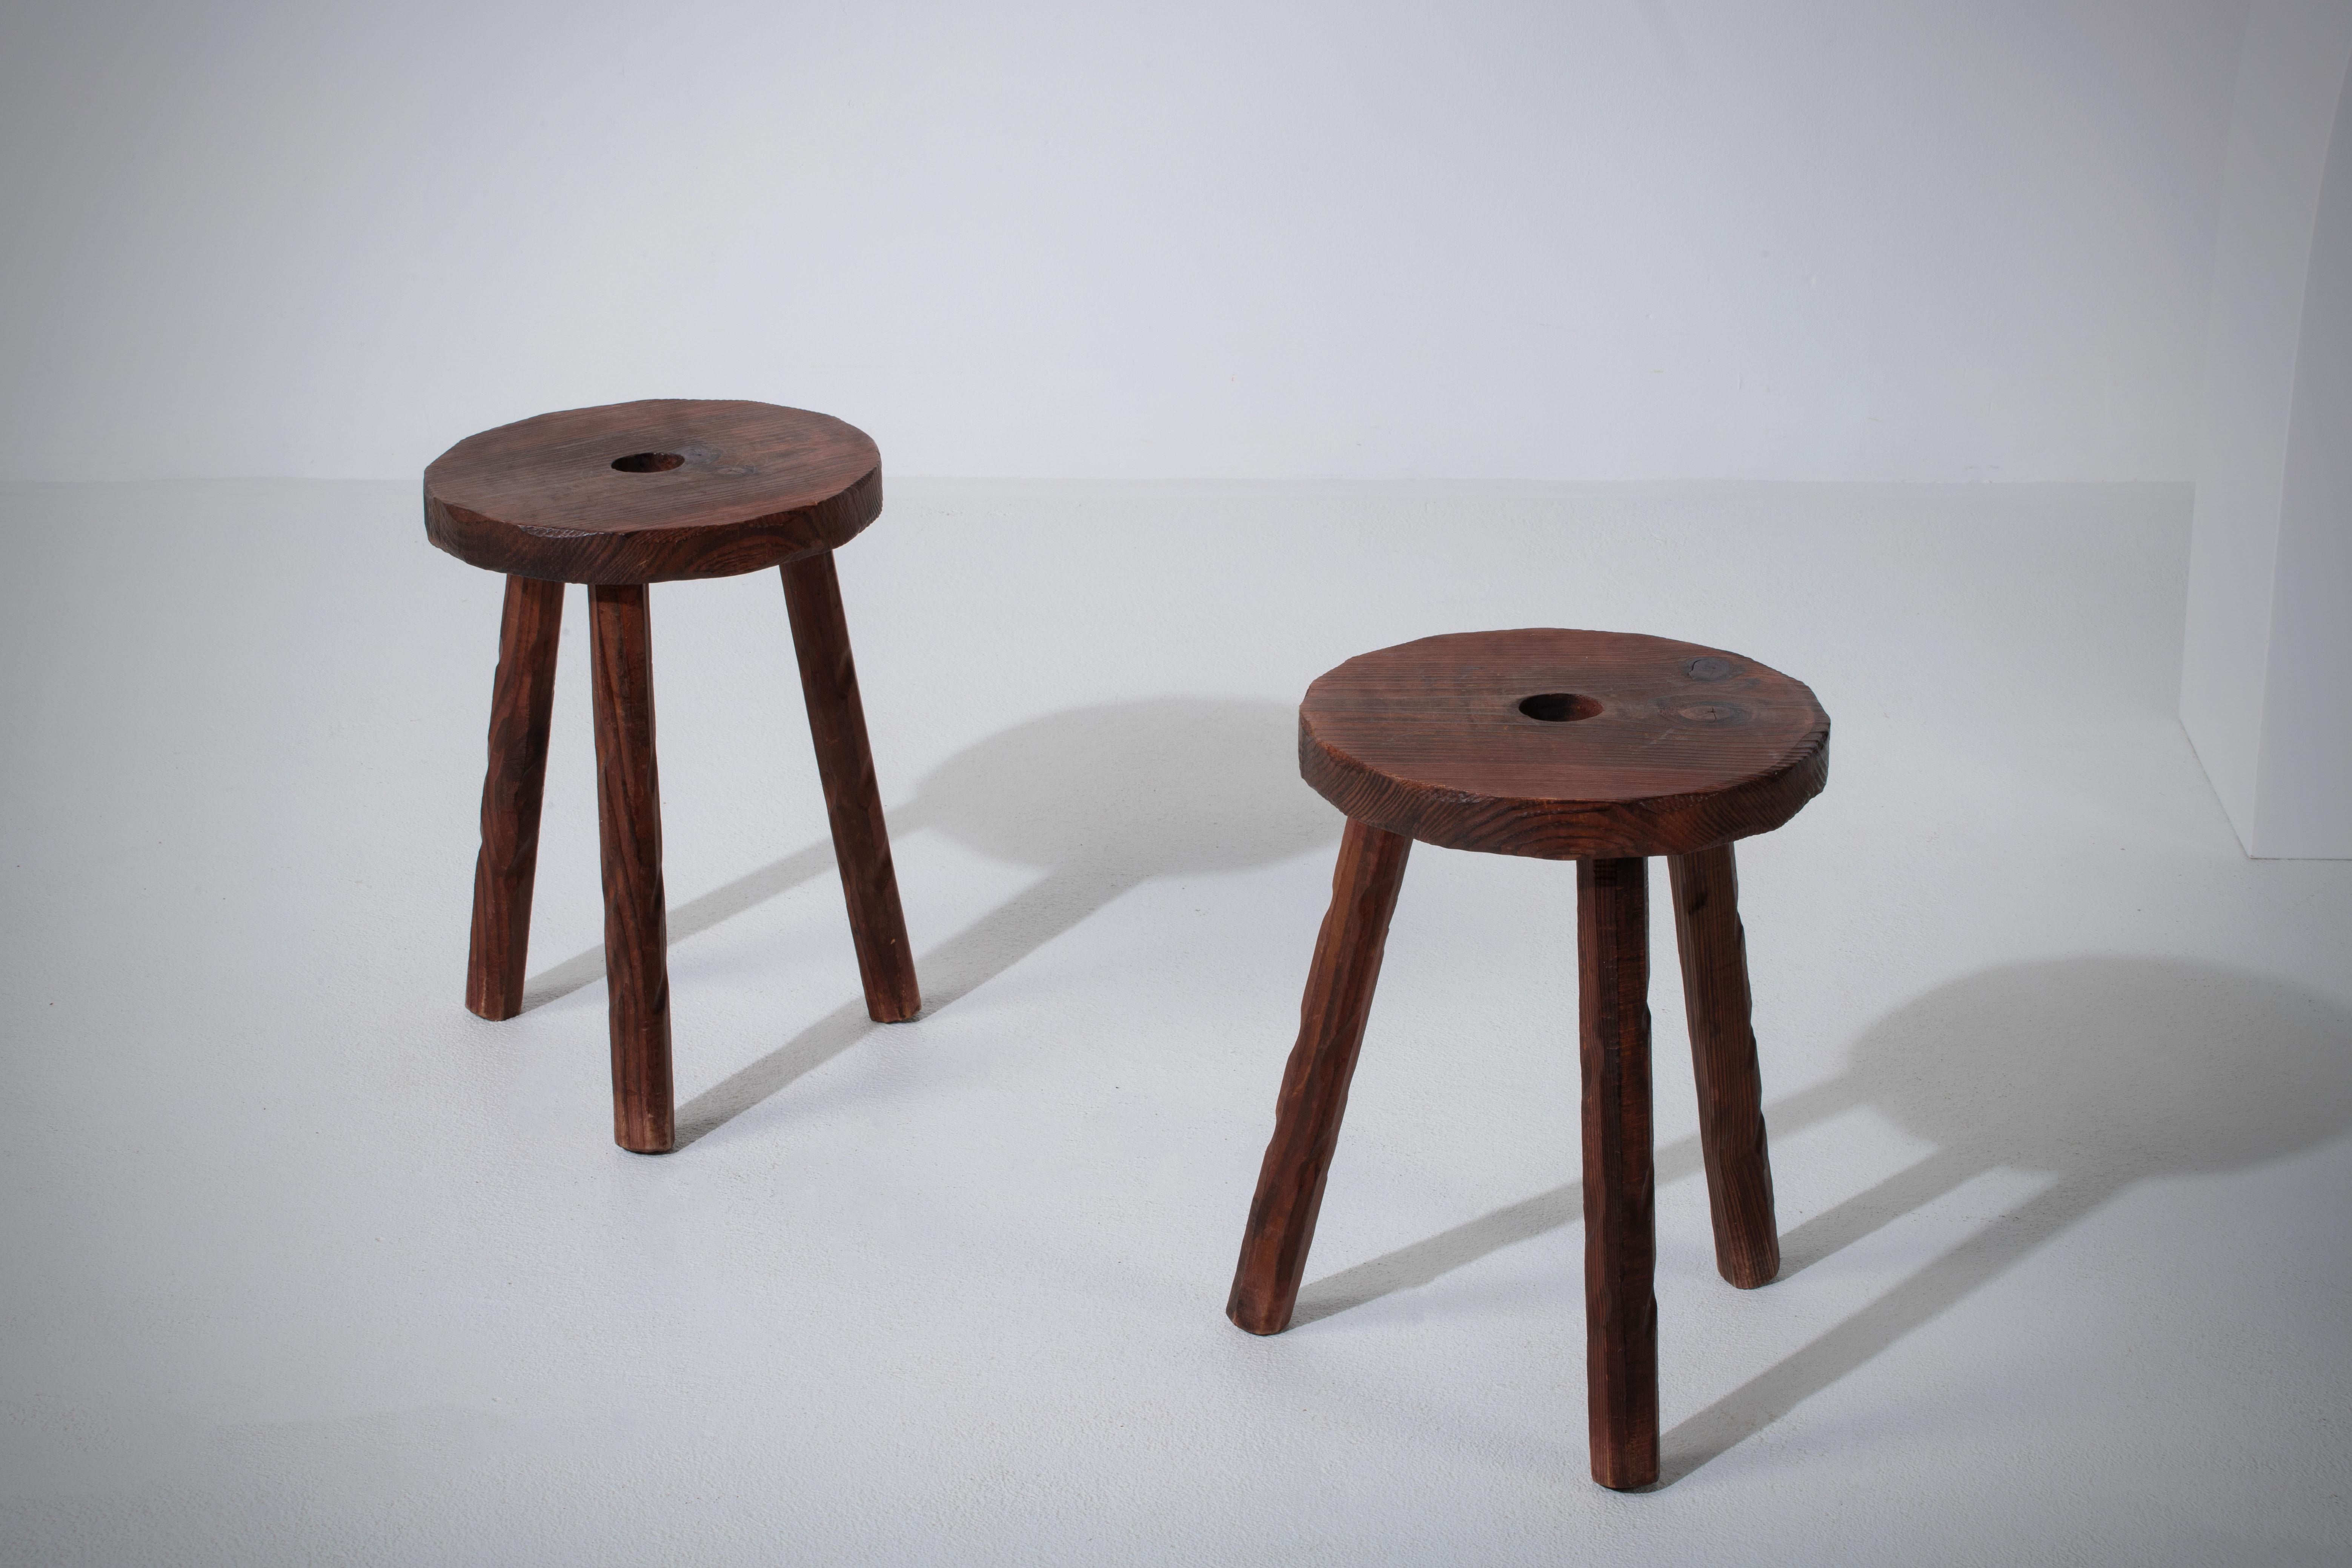 Fantastic wood pair of stools from France in the style of Jean Touret. Made in the 1960s with three legs. No hardware. Good vintage condition.